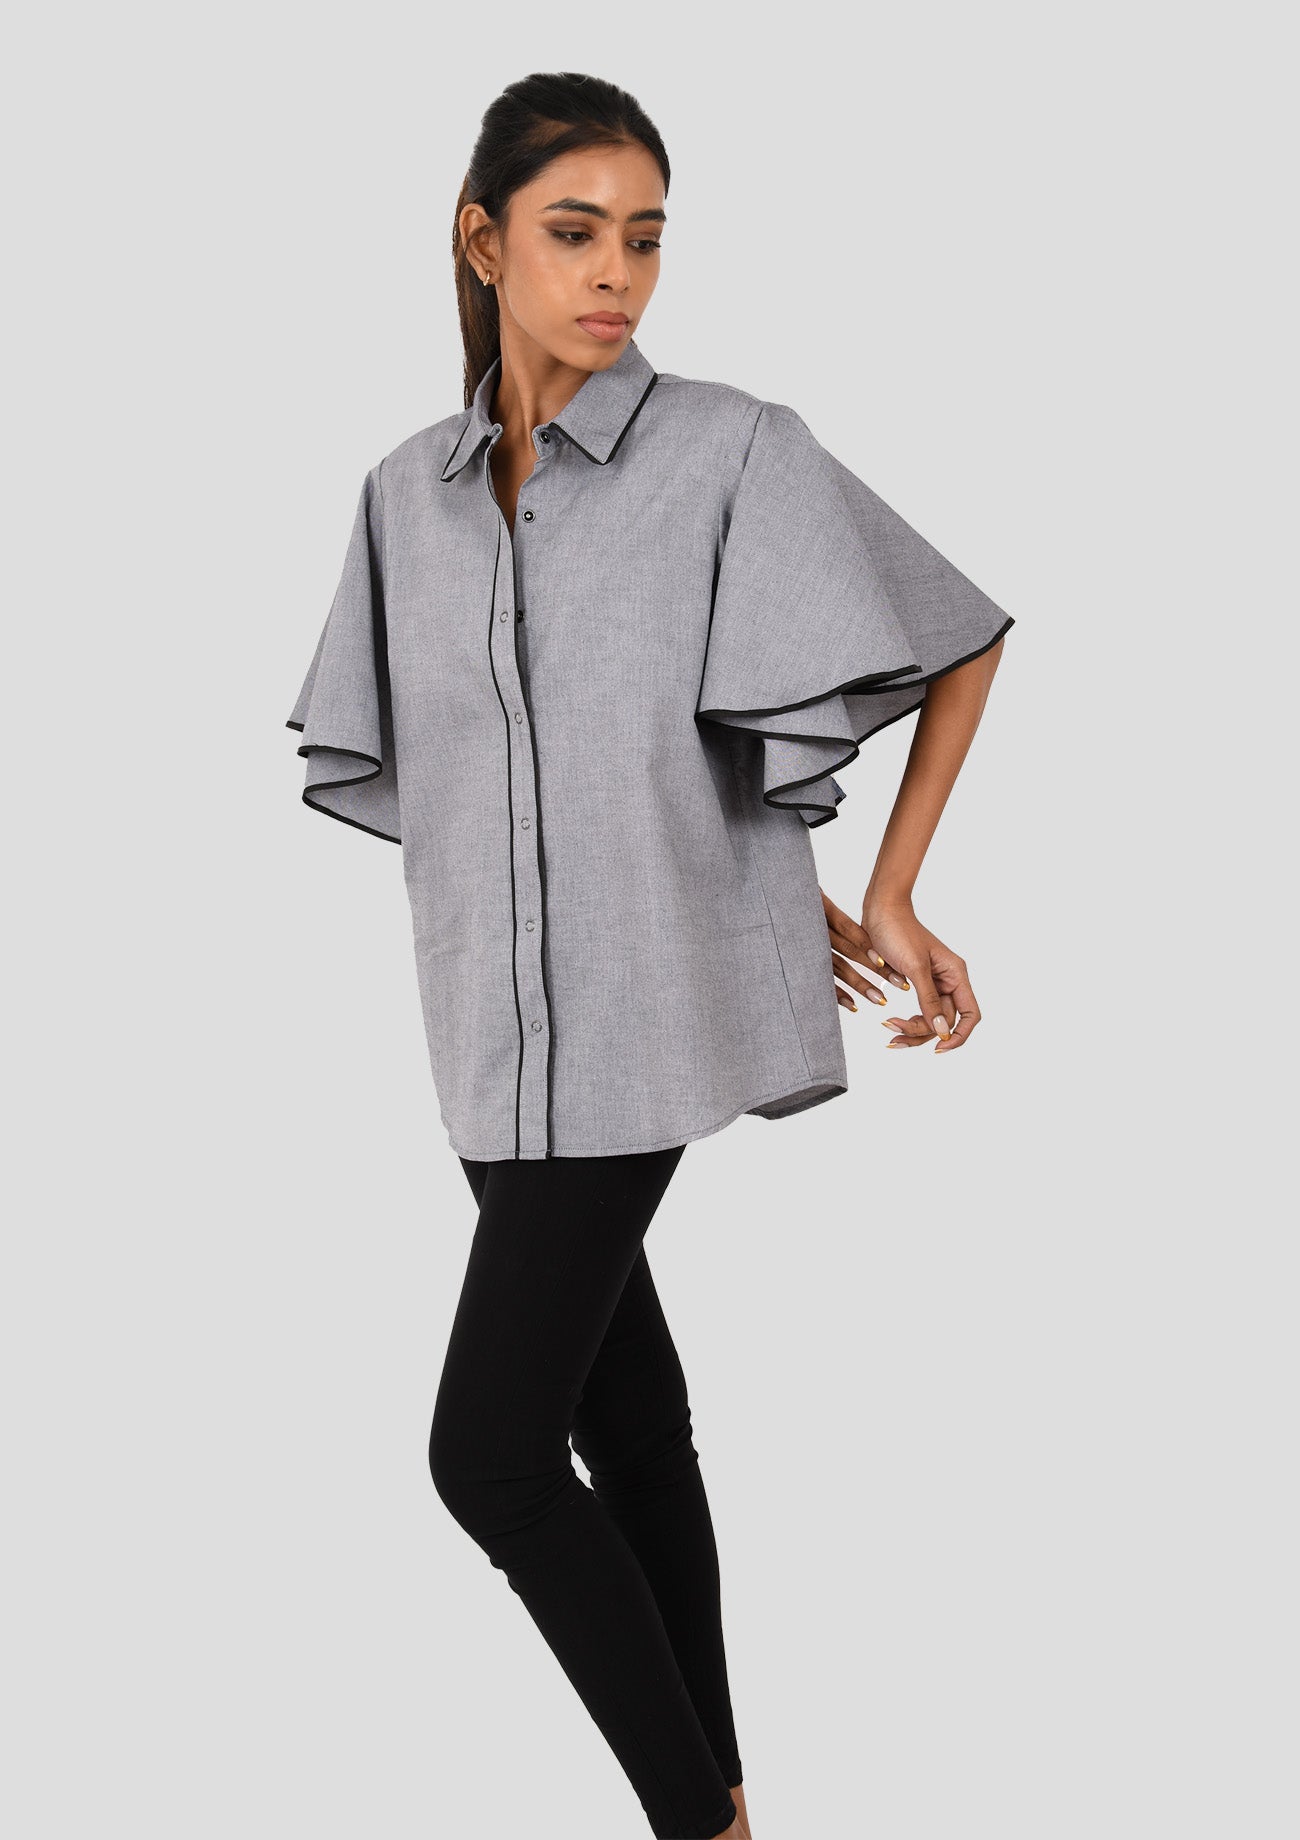 Grey Melange Shirt With Flare Sleeves With Embroidery "Faith" On Back